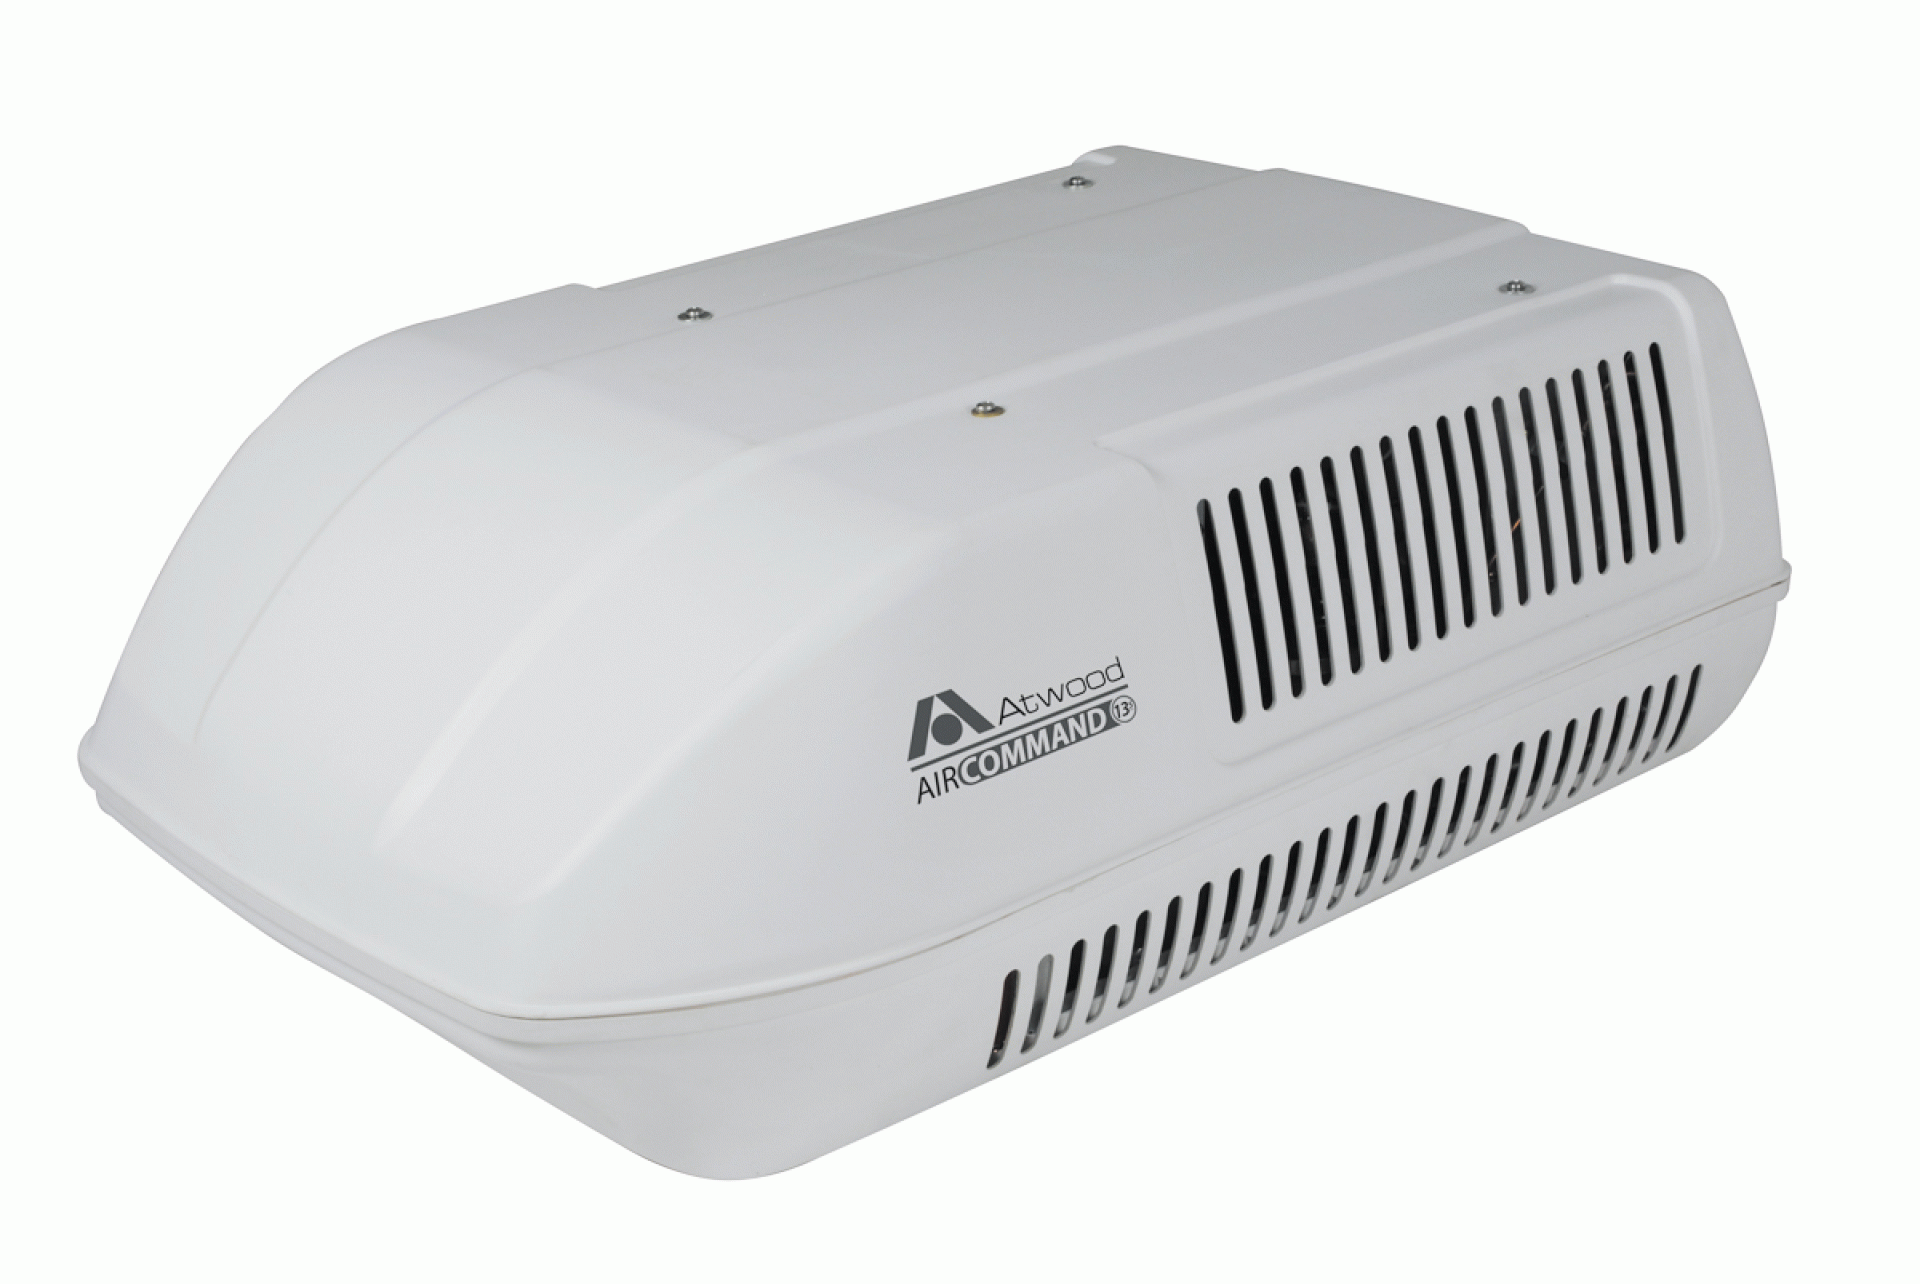 ATWOOD MOBILE PRODUCTS LLC | 15028 | ATWOOD AIR COMMAND AIR CONDITIONER 15 000 BTU DUCTED COOL/HEAT PUMP